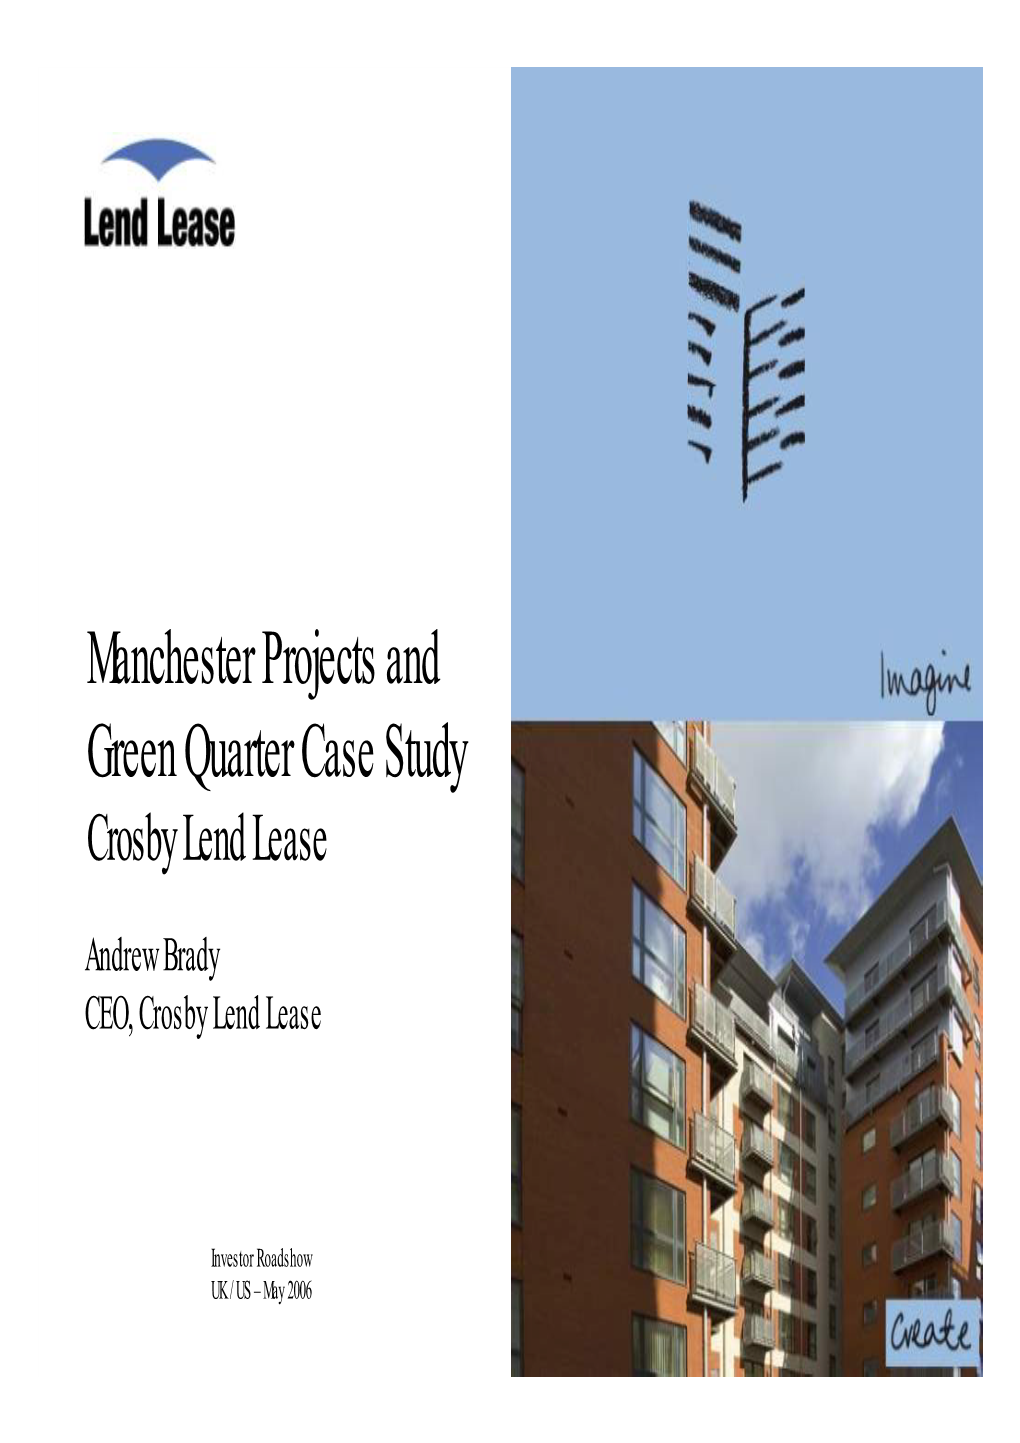 Manchester Projects and Green Quarter Case Study Crosby Lend Lease